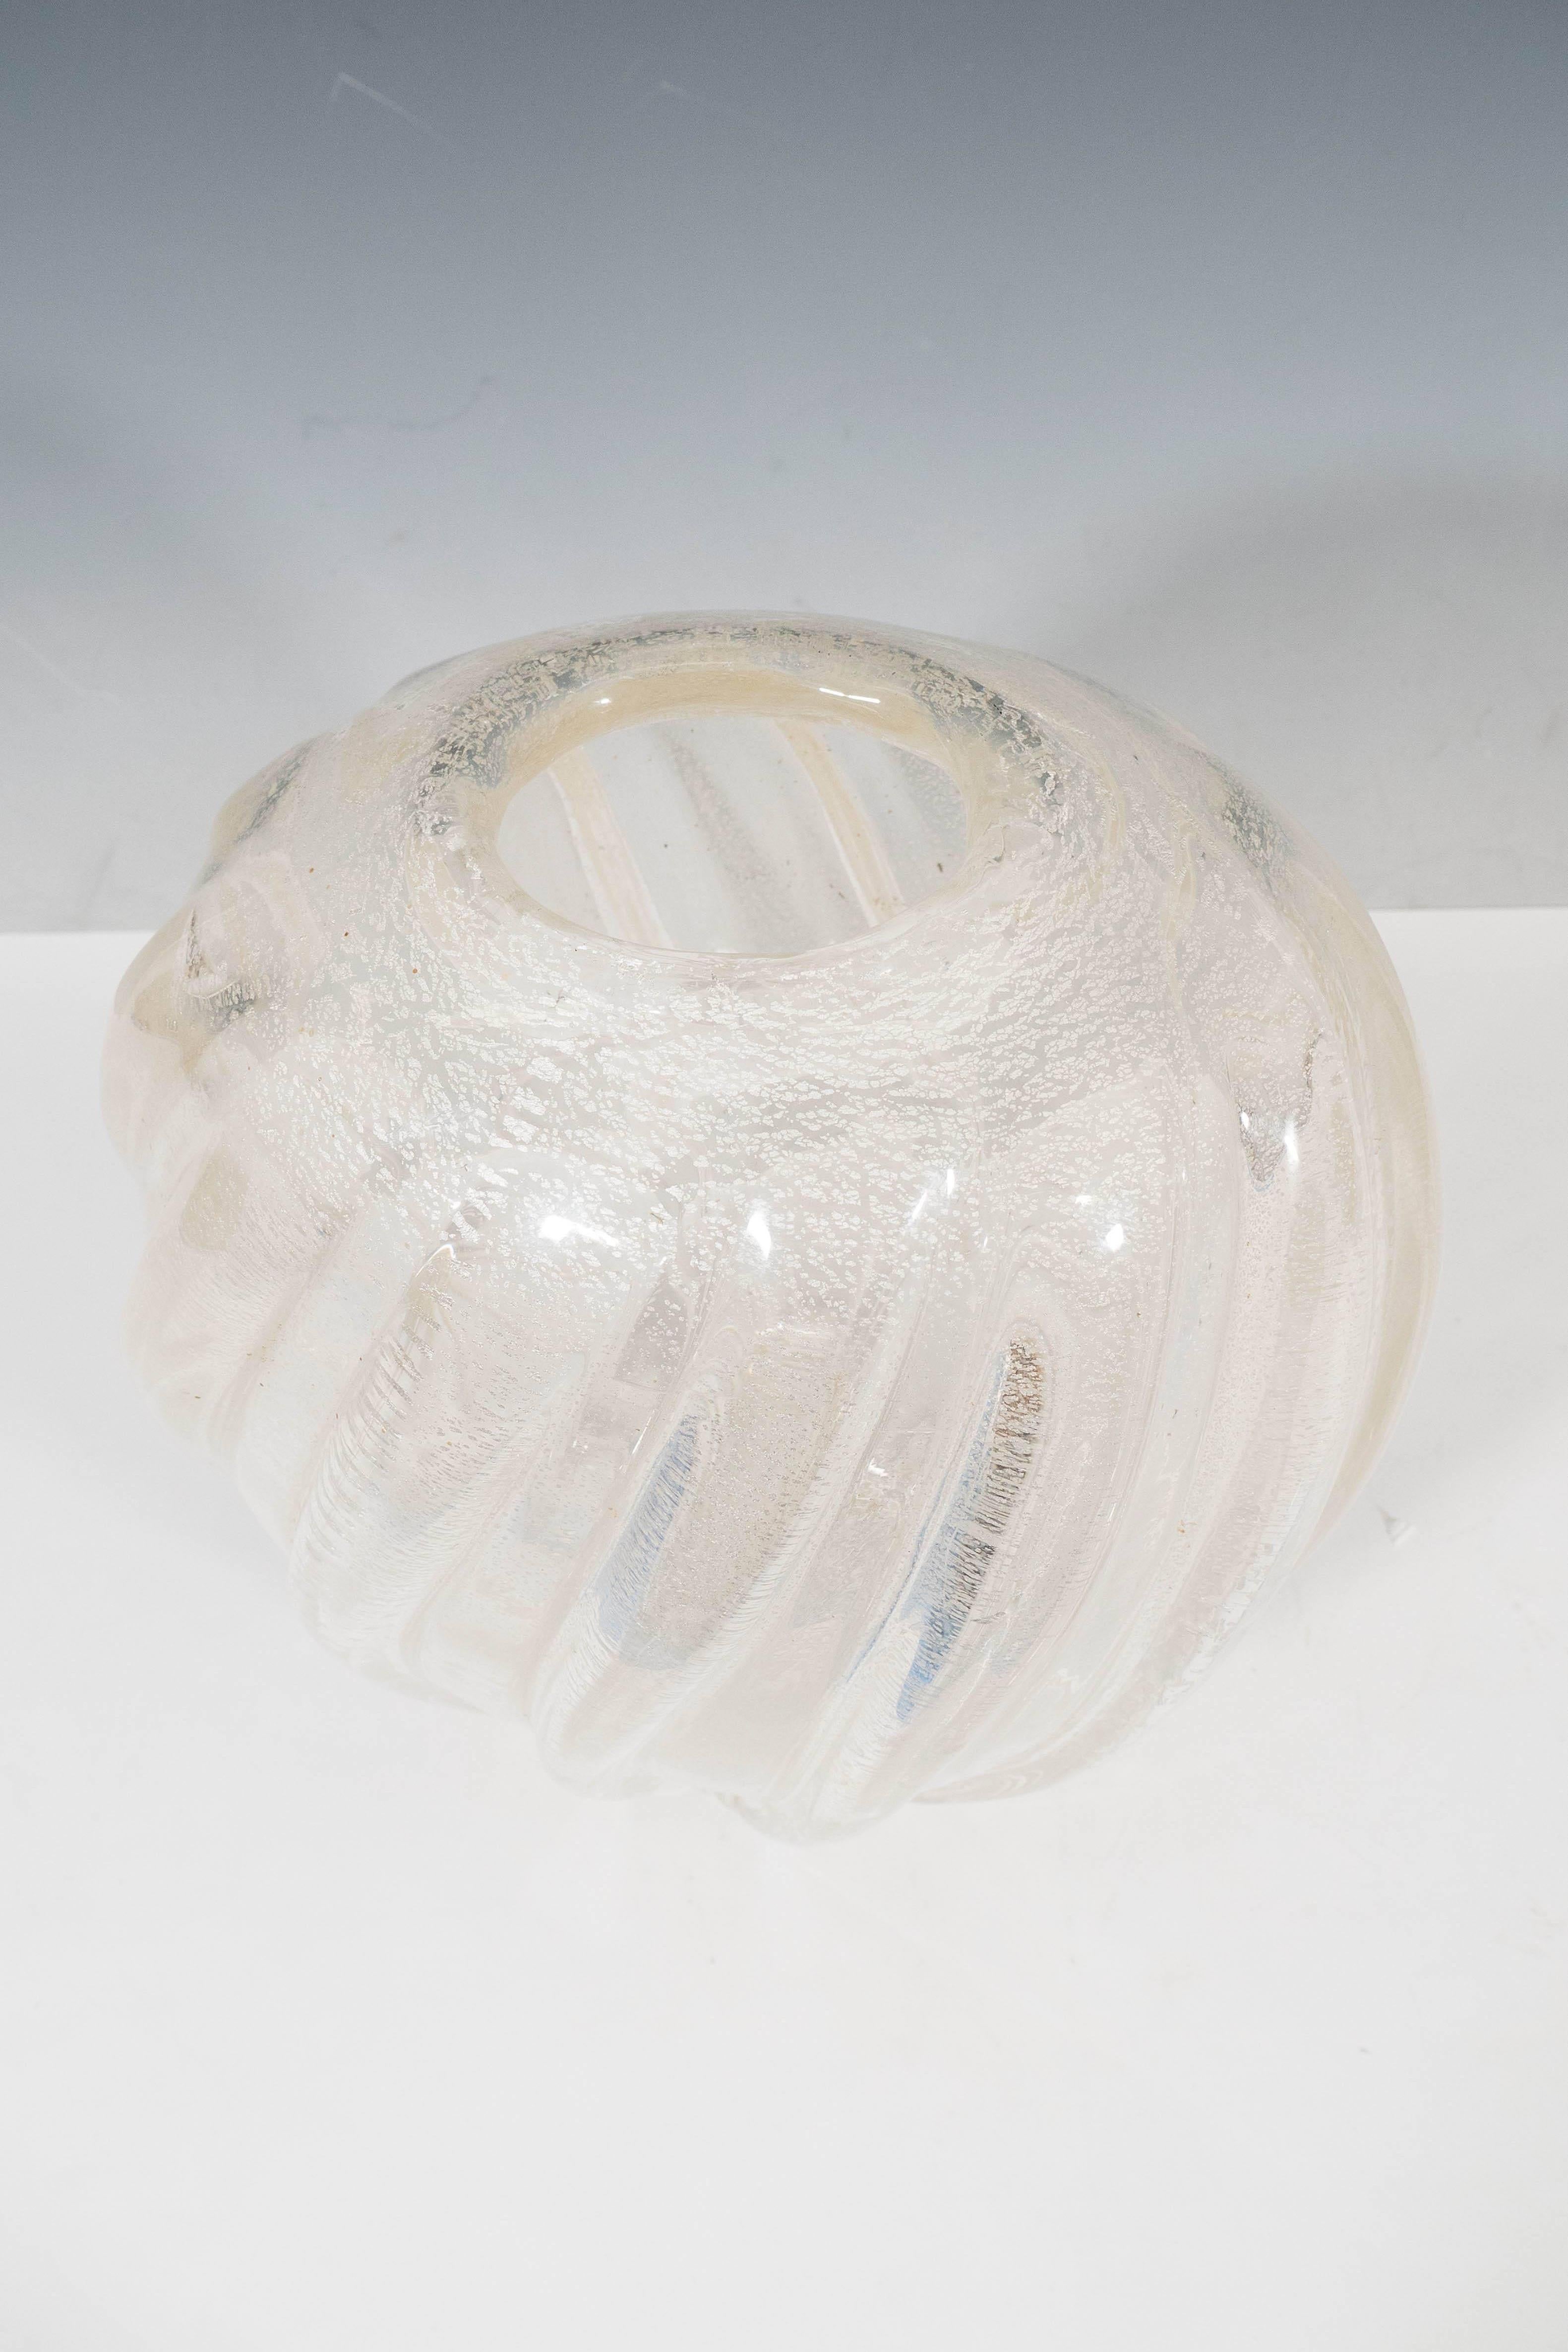 Midcentury Murano Glass Pillow Vase with 14k White Gold by Archimede Seguso In Good Condition In New York, NY